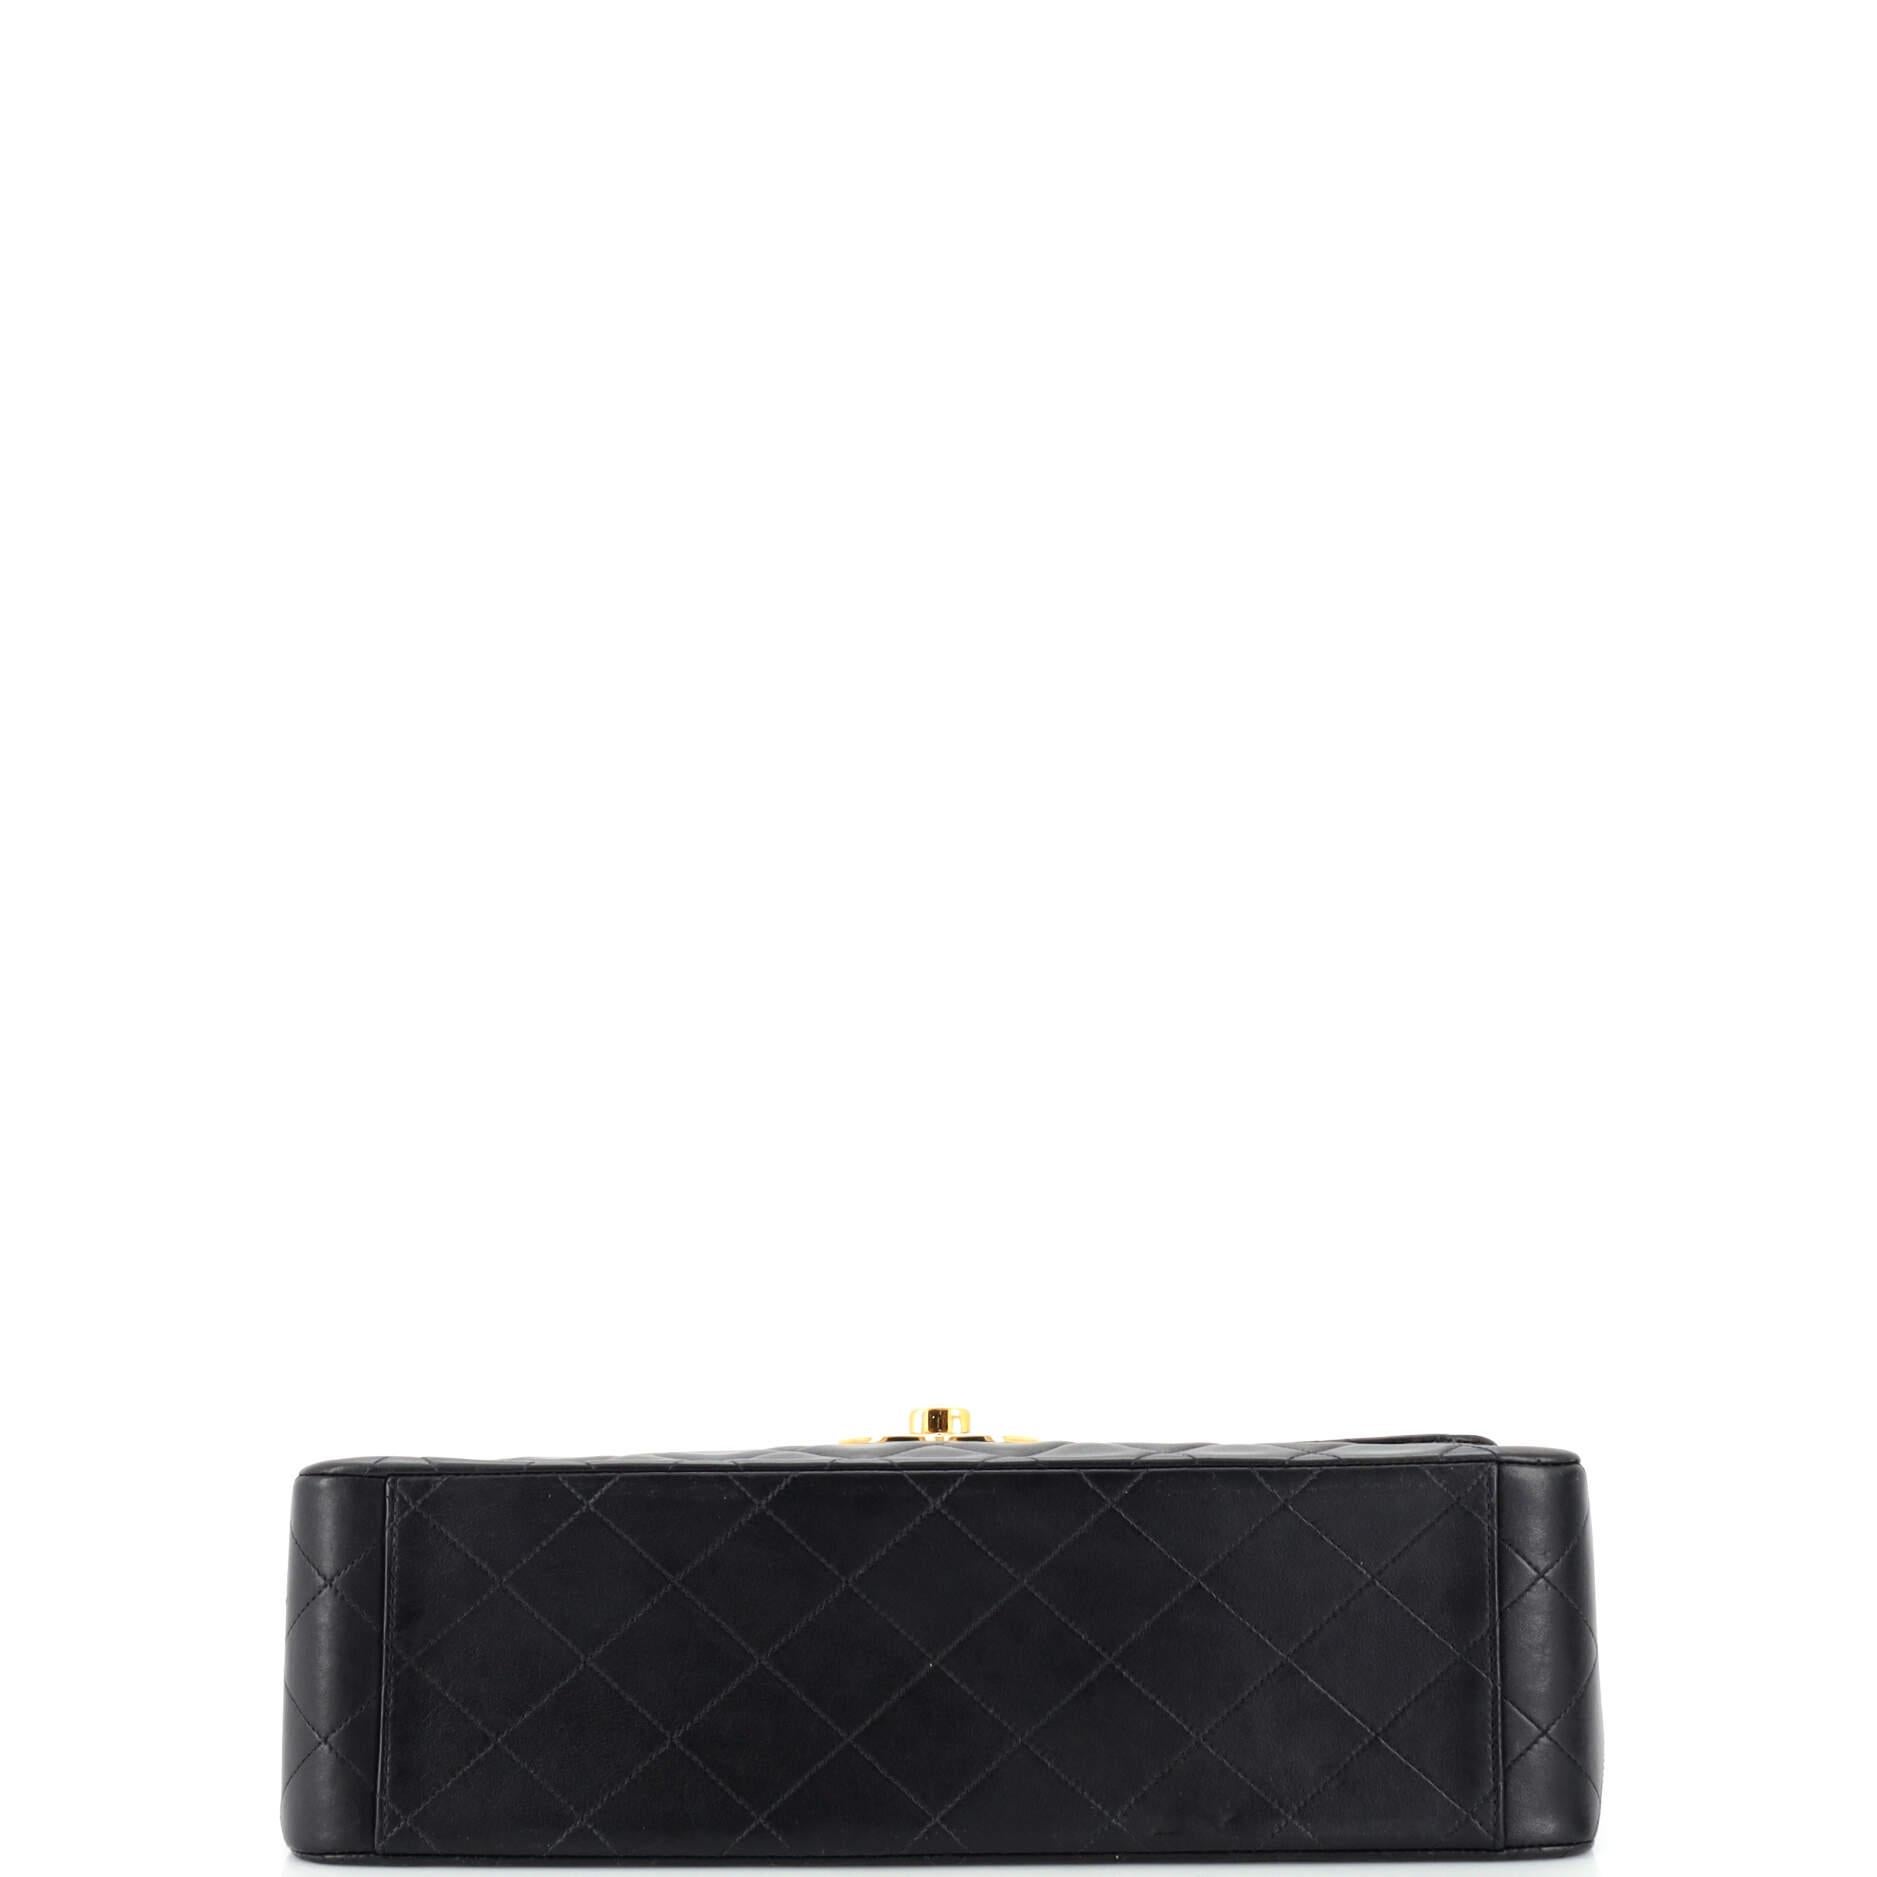 Chanel Vintage Classic Single Flap Bag Quilted Lambskin Maxi For Sale 1